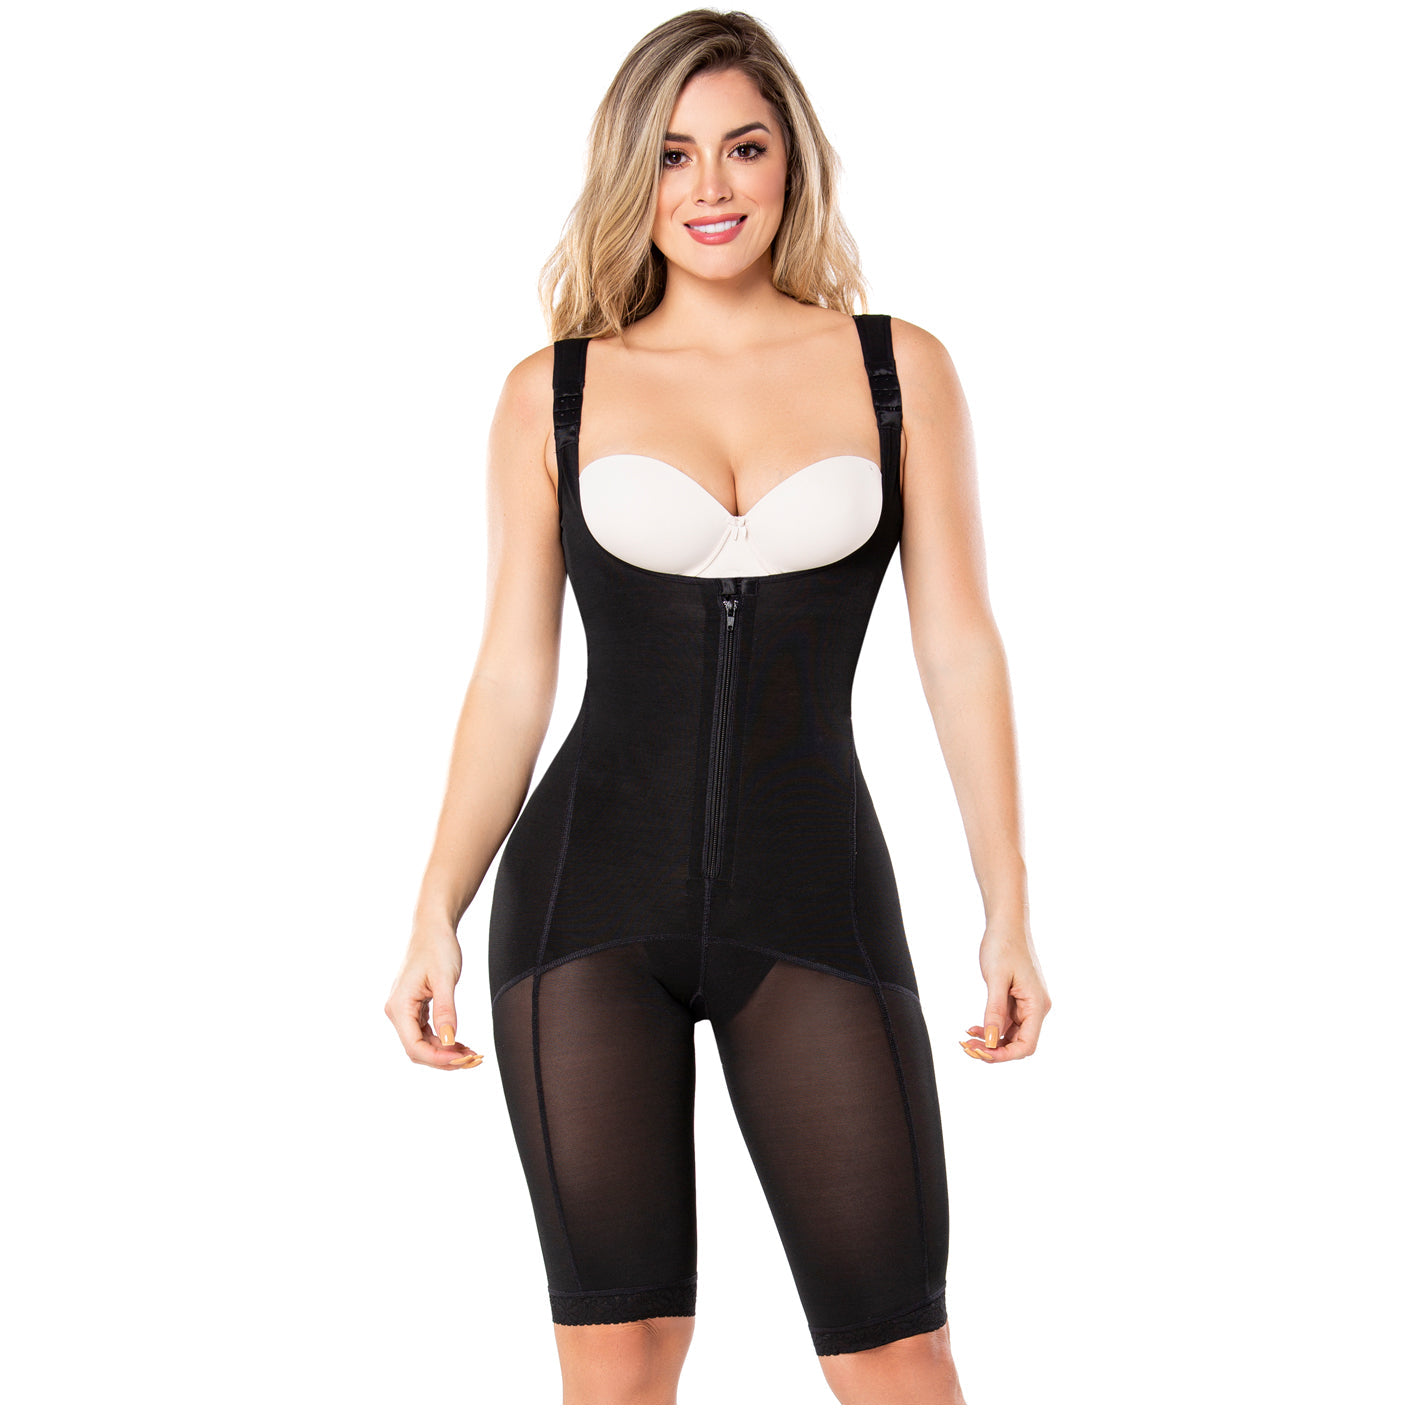 Daily Use Full Body Shaper, Postsurgical Girdle